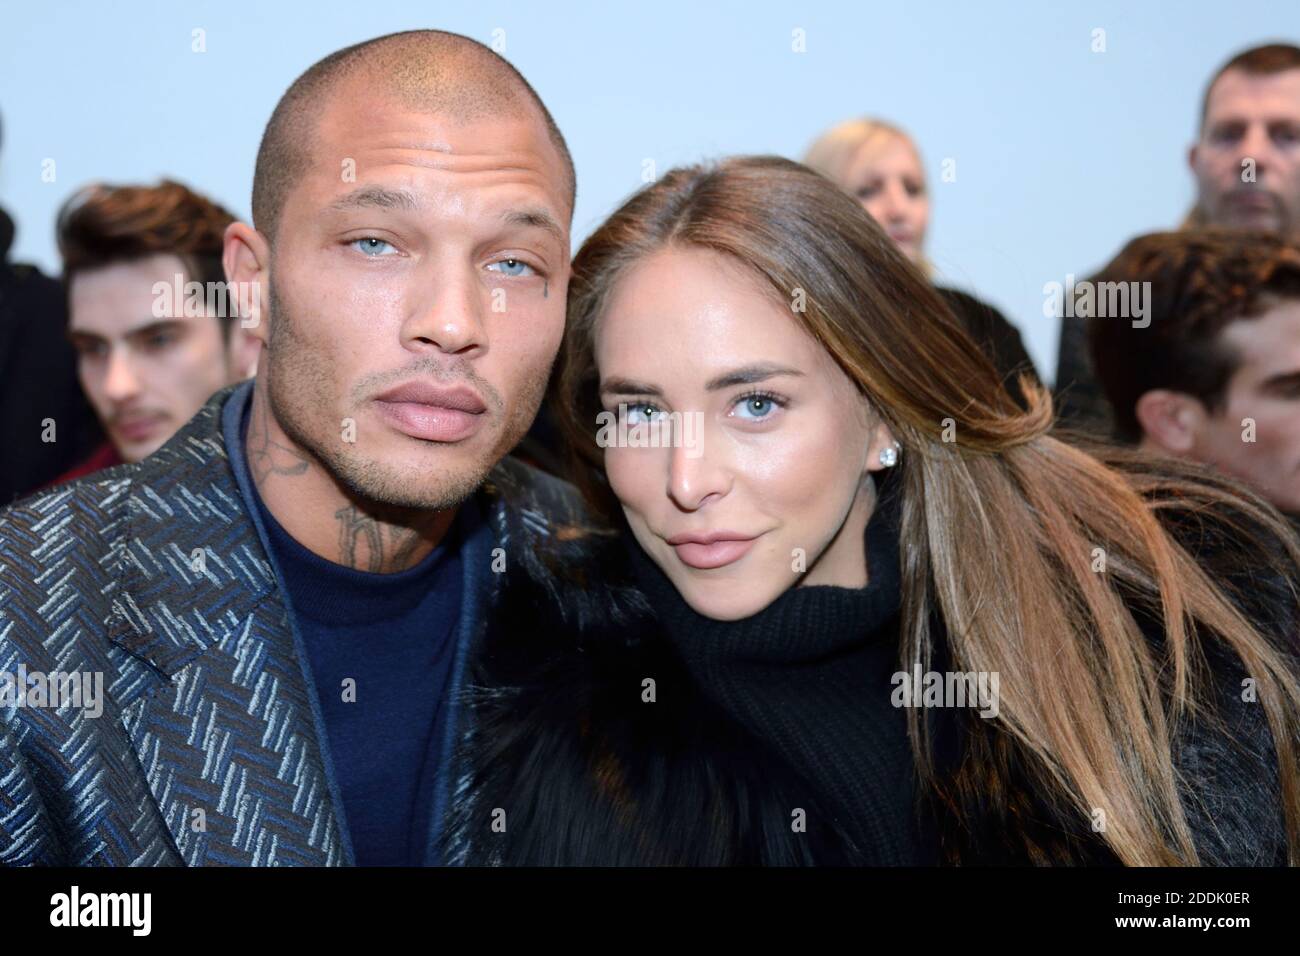 File photo - Jeremy Meeks and Chloe Green attending the Cerruti 1881 show  as part of Paris Men's Fashion Week Fall/Winter 2018-2019 on January 19,  2018 in Paris, France. Topshop heiress Chloe